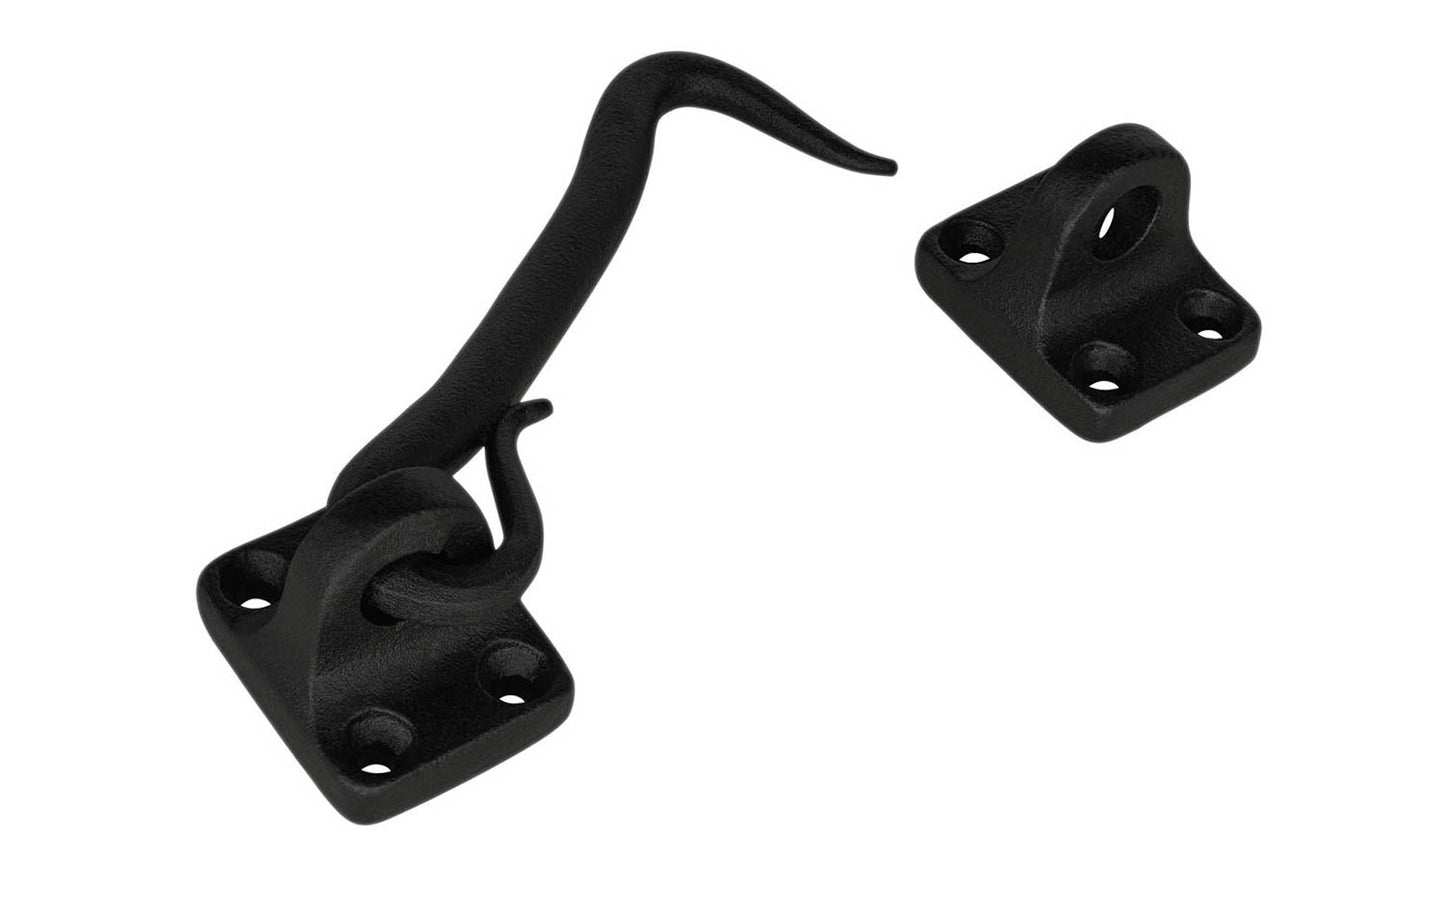 A rustic-looking hook and eye that's hand forged with a black powder coated finish to resist rust. Made of hand forged steel material with a black finish, it has a nice durable & strong feel. This piece of hardware is great for shutters, gates, or doors - Model 088428 - 4" overall length - Black Forged Hook & Eye